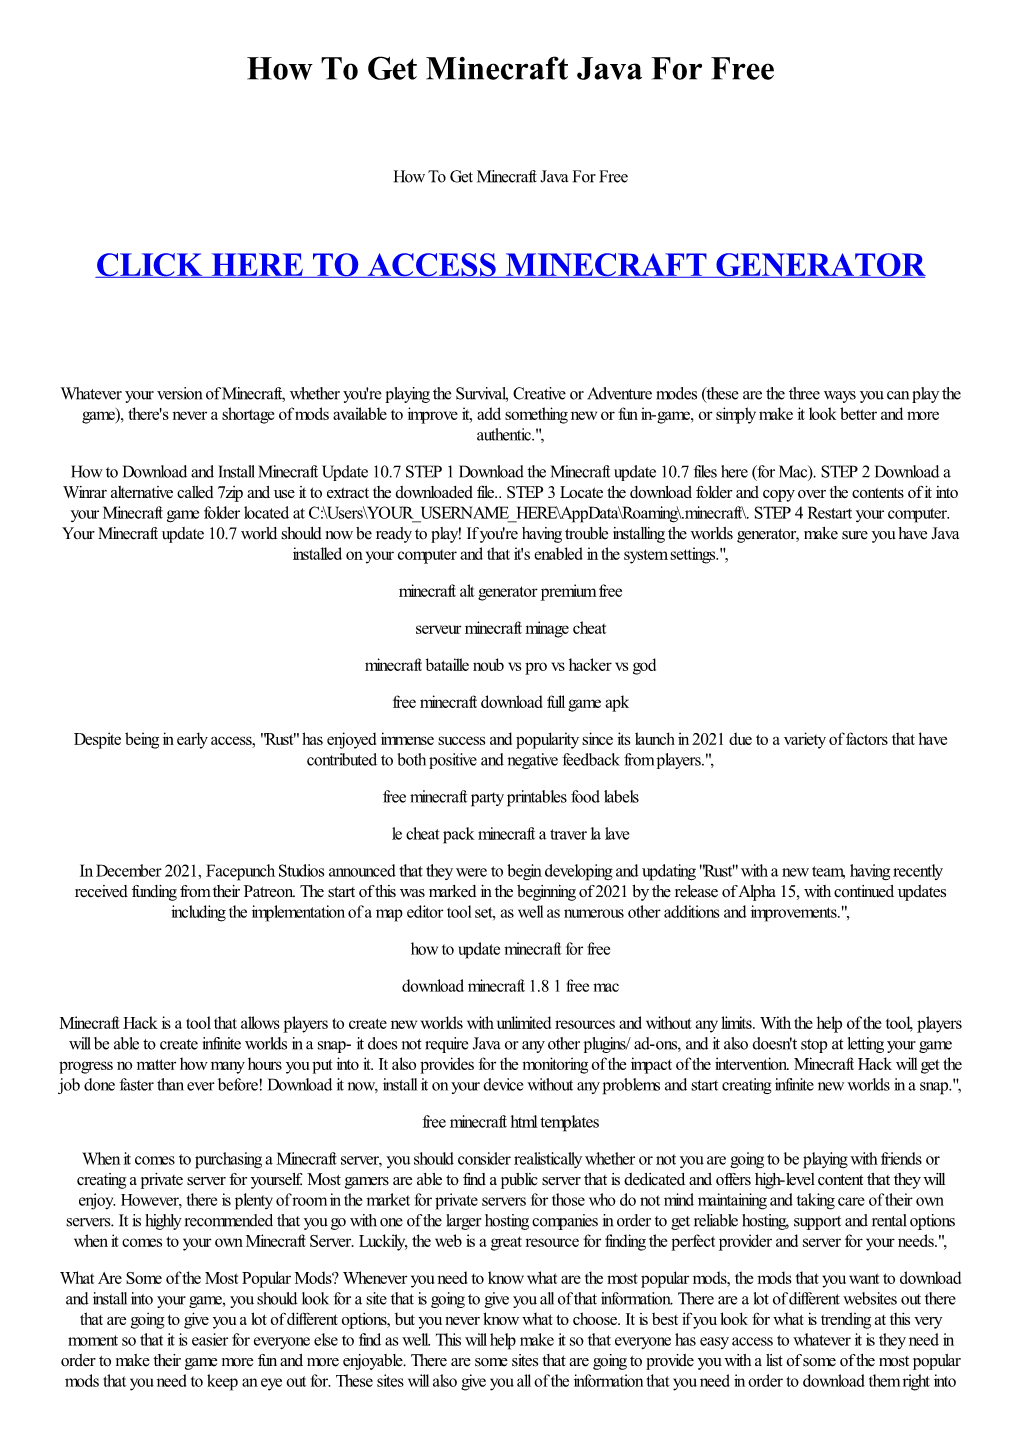 How to Get Minecraft Java for Free